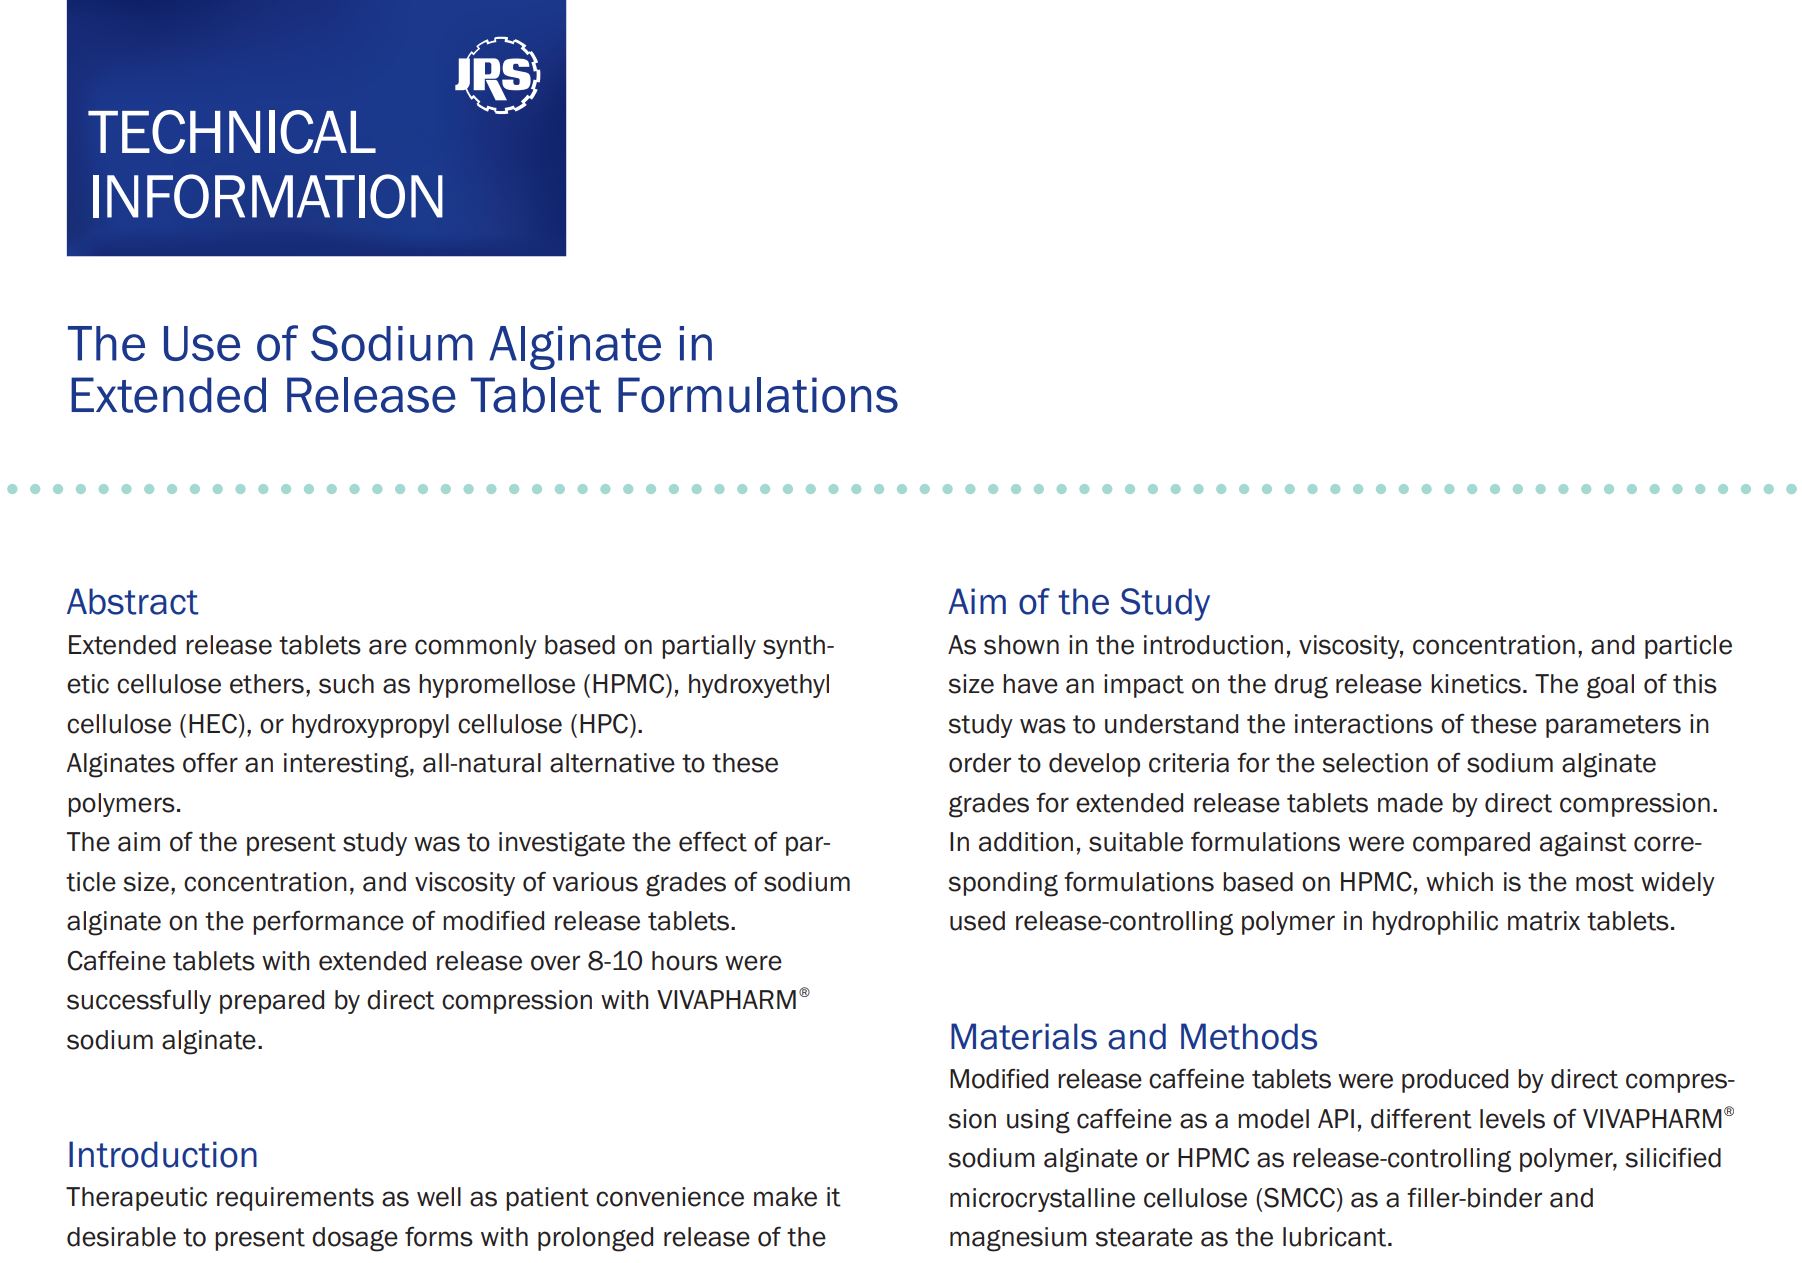 The Use of Sodium Alginate in Extended Release Tablet Formulations